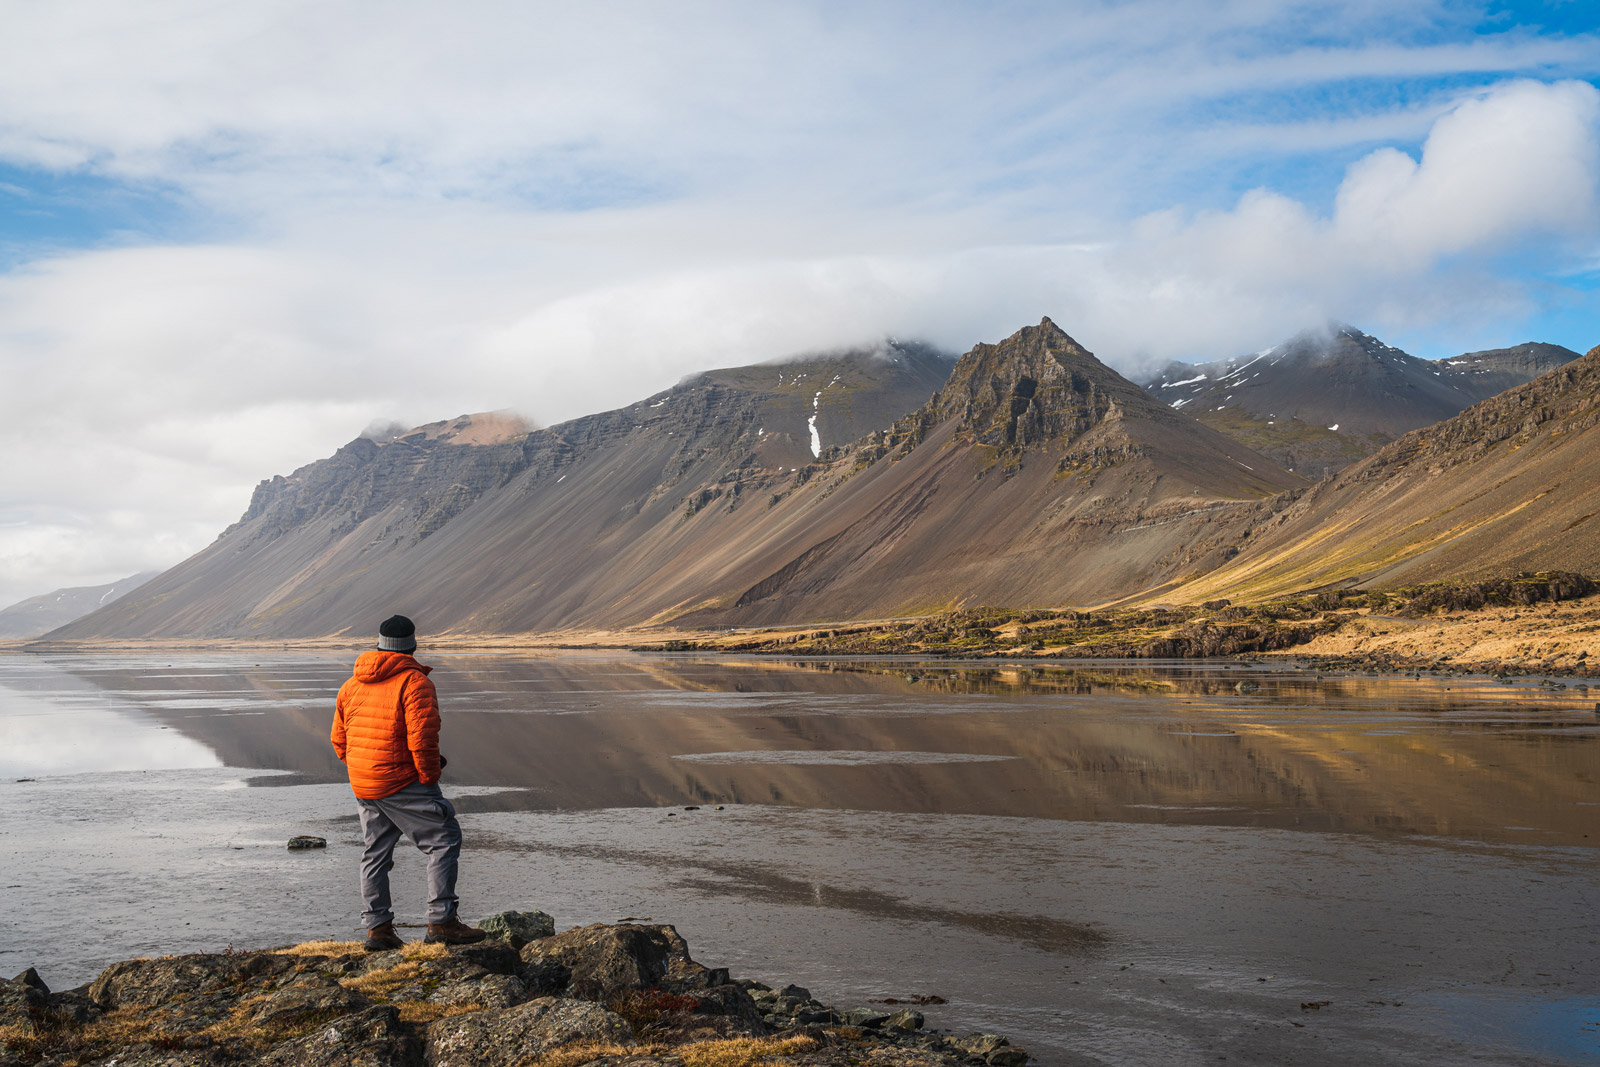 Kevin Mullett, photographing the shores of Iceland in 2022